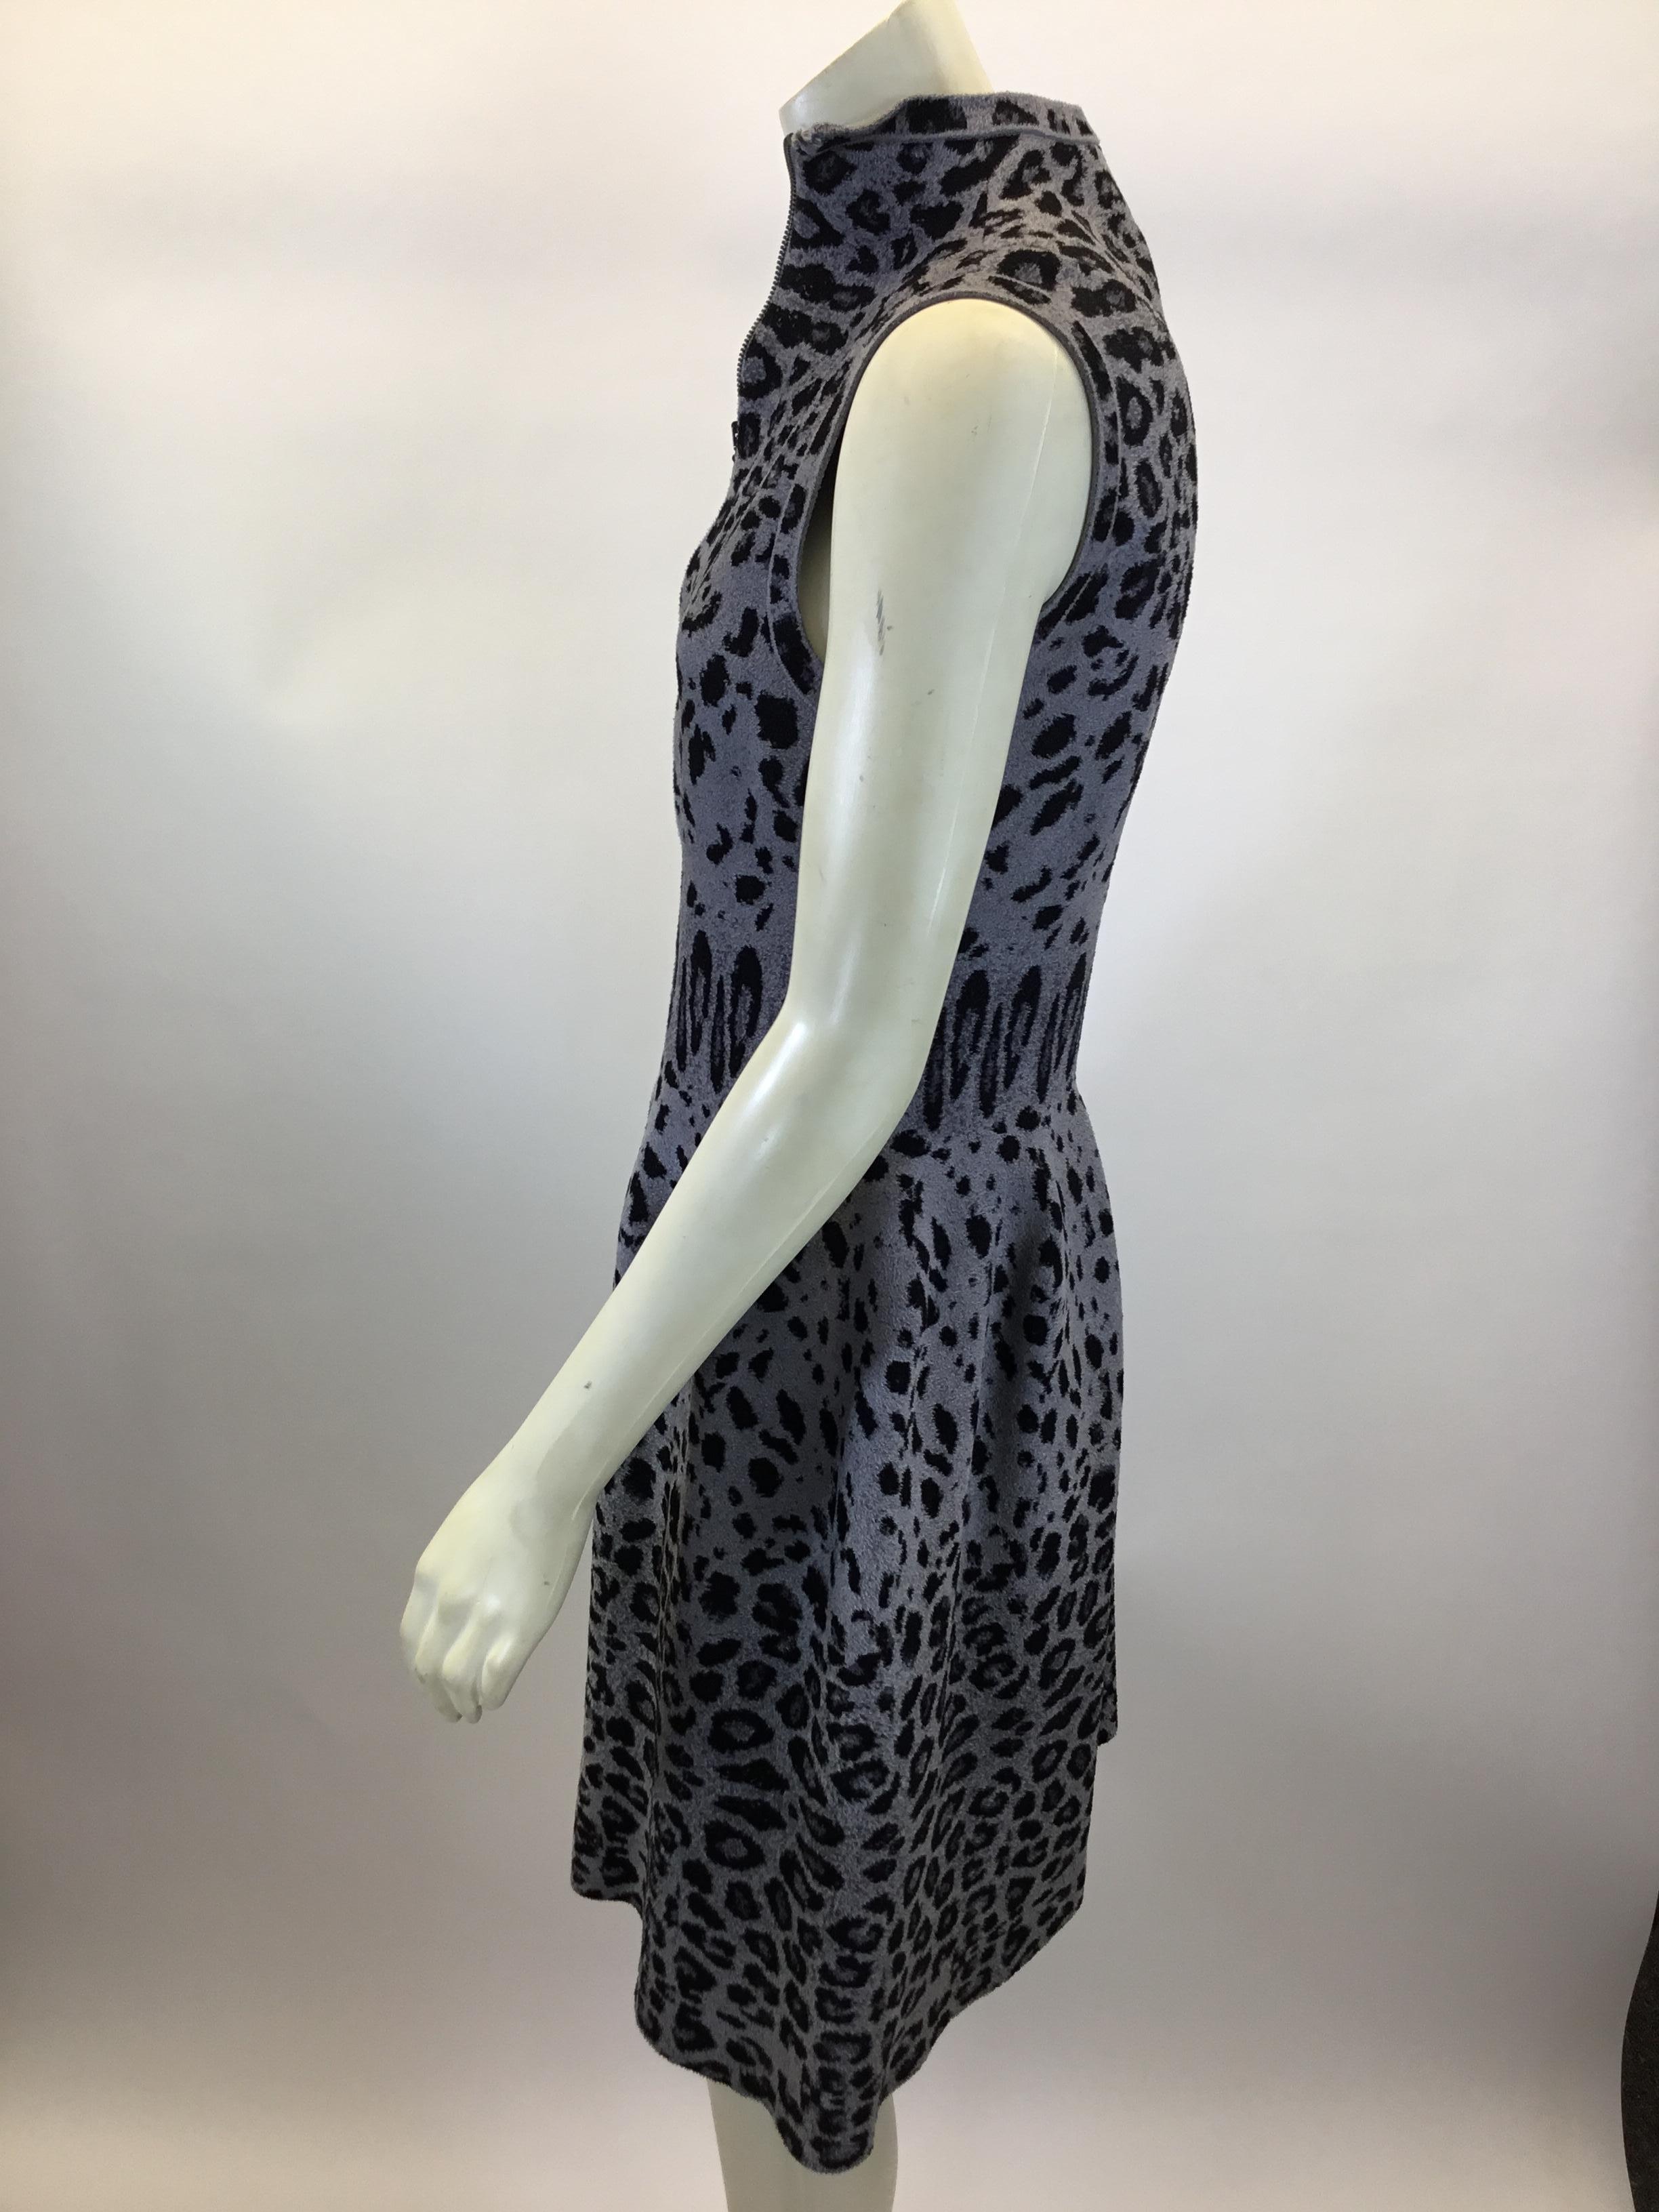 Alaia Grey and Black Animal Print Zip Up Dress
$999
Made in Italy
63% Viscose, 37% Nylon
Size 42
Length 36”
Bust 33”
Waist 29”
